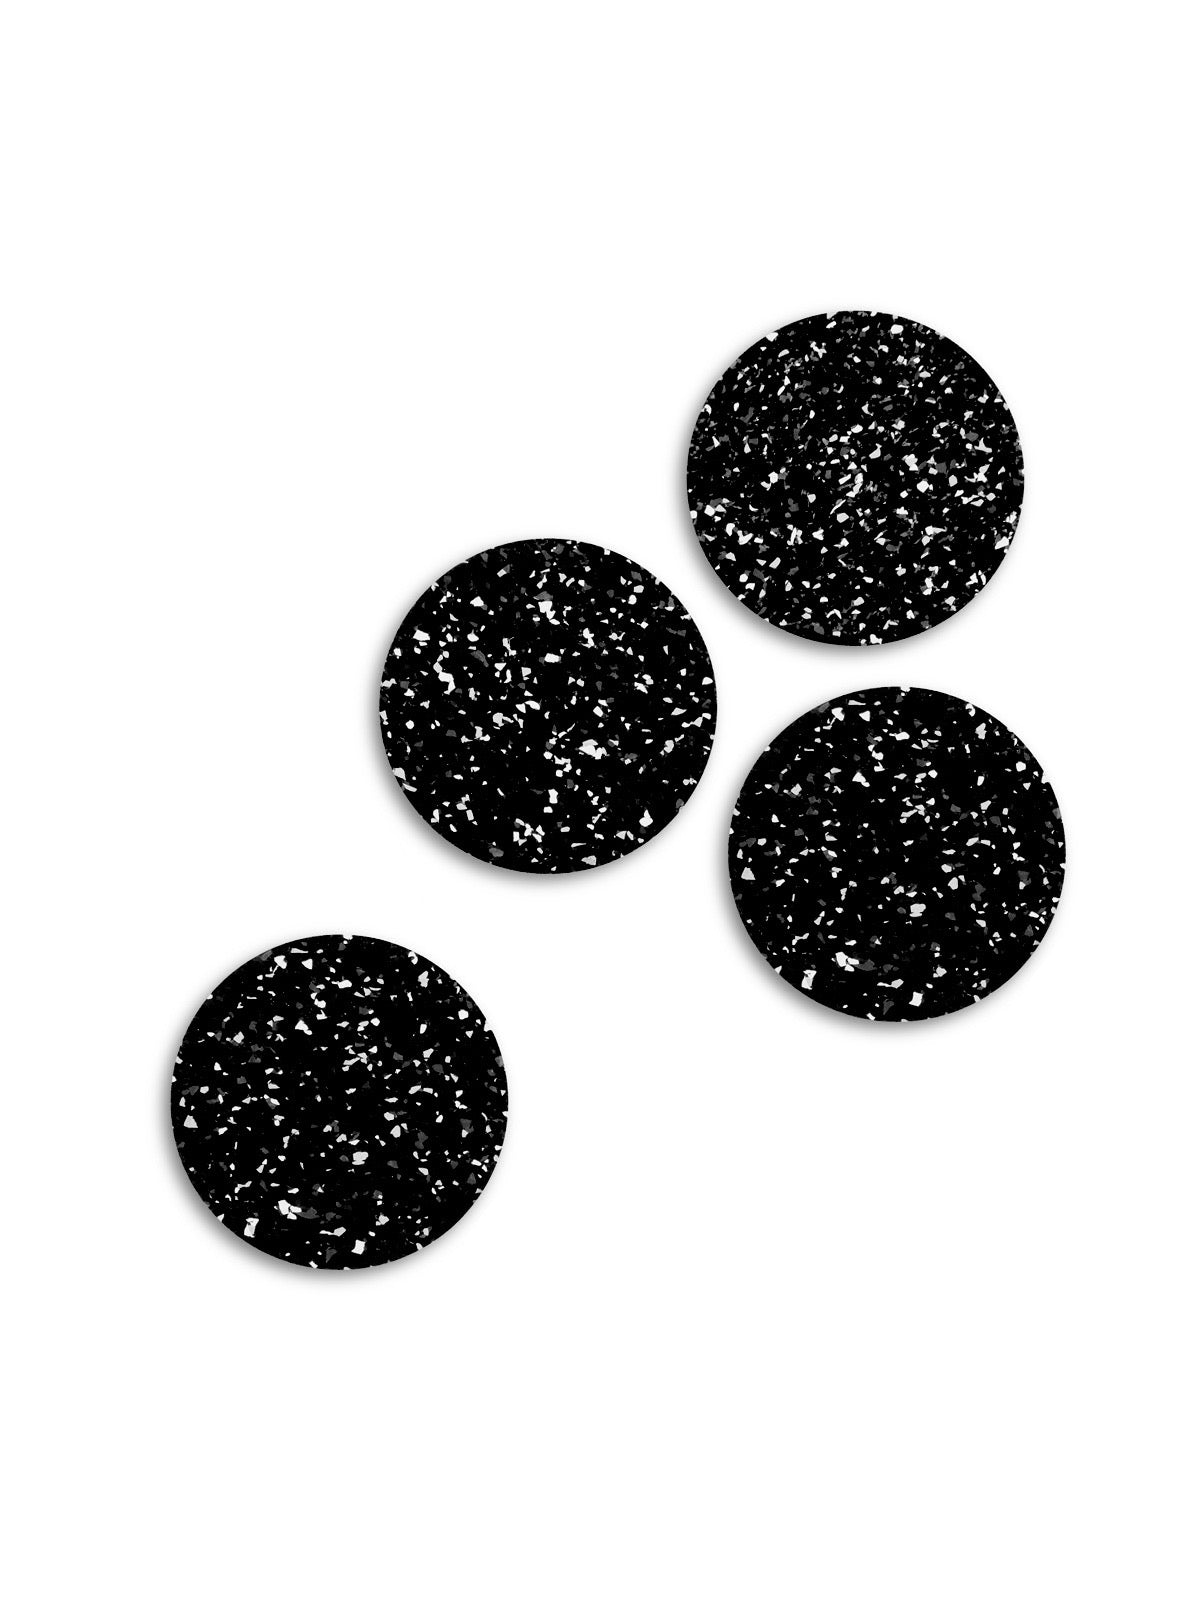 Round Rubber Coasters in Black (Set of 4)